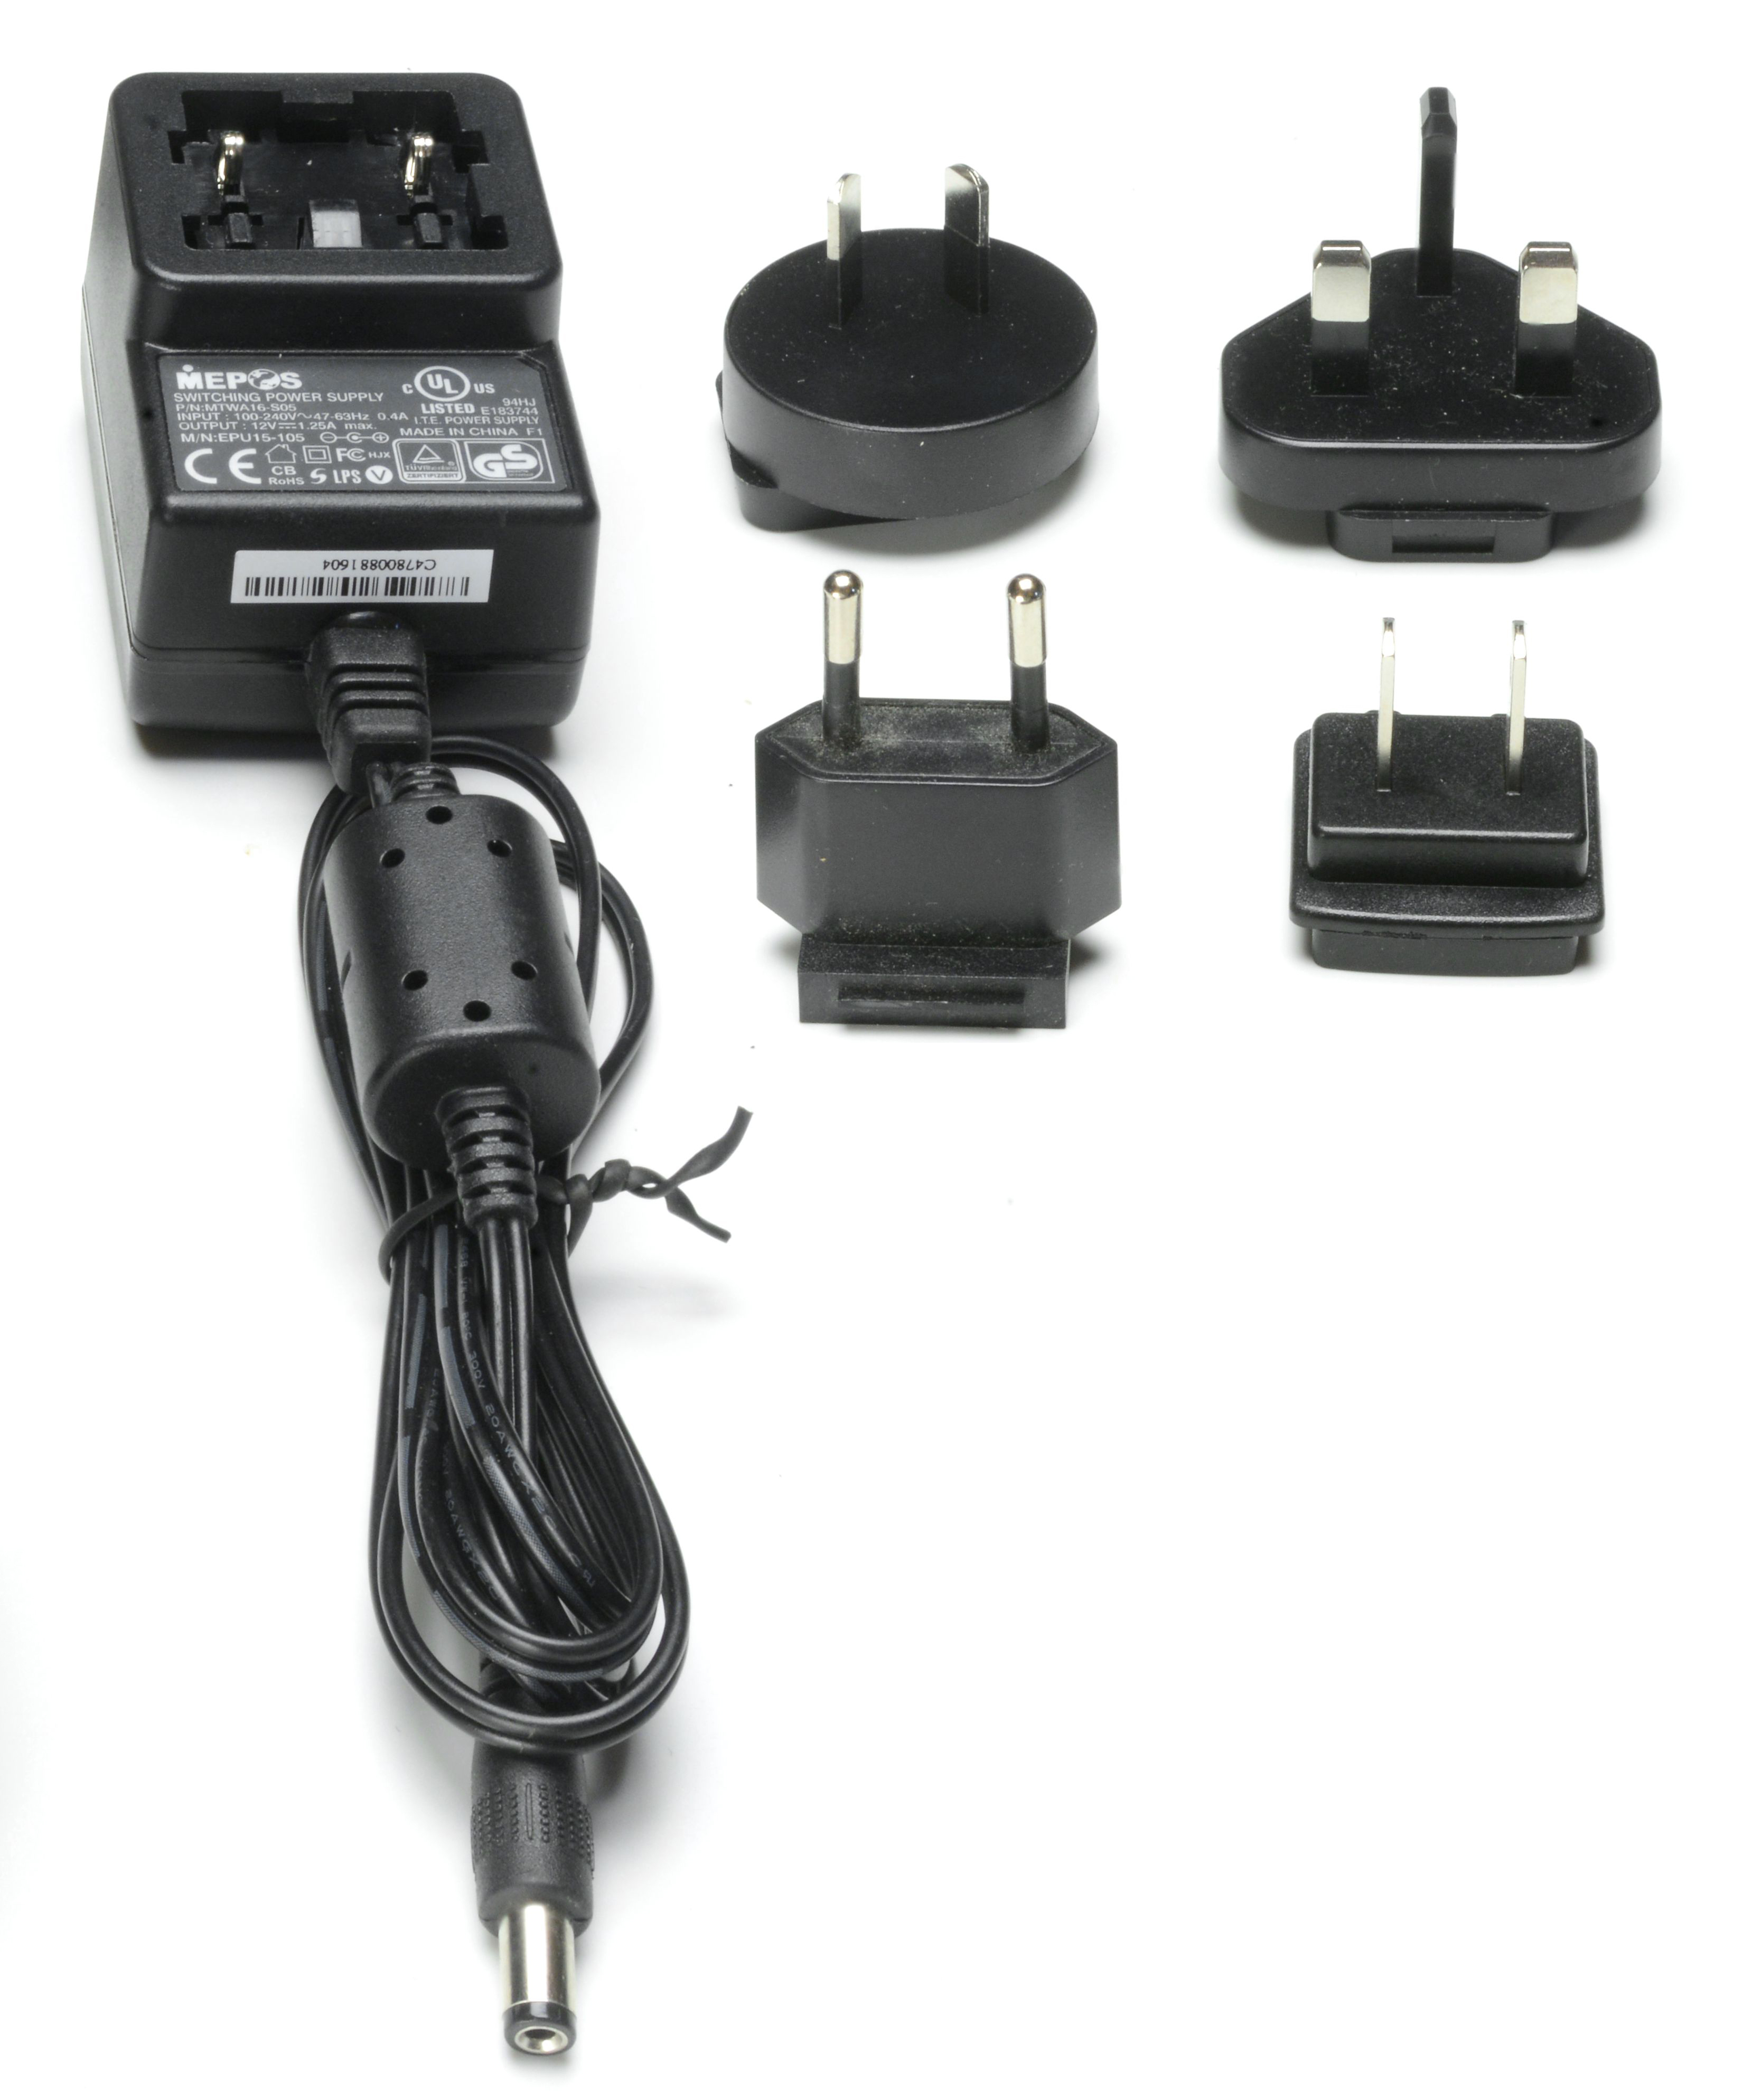 5627 - Multiverse SHoW Baby 12VDC Power Supply with plug kit